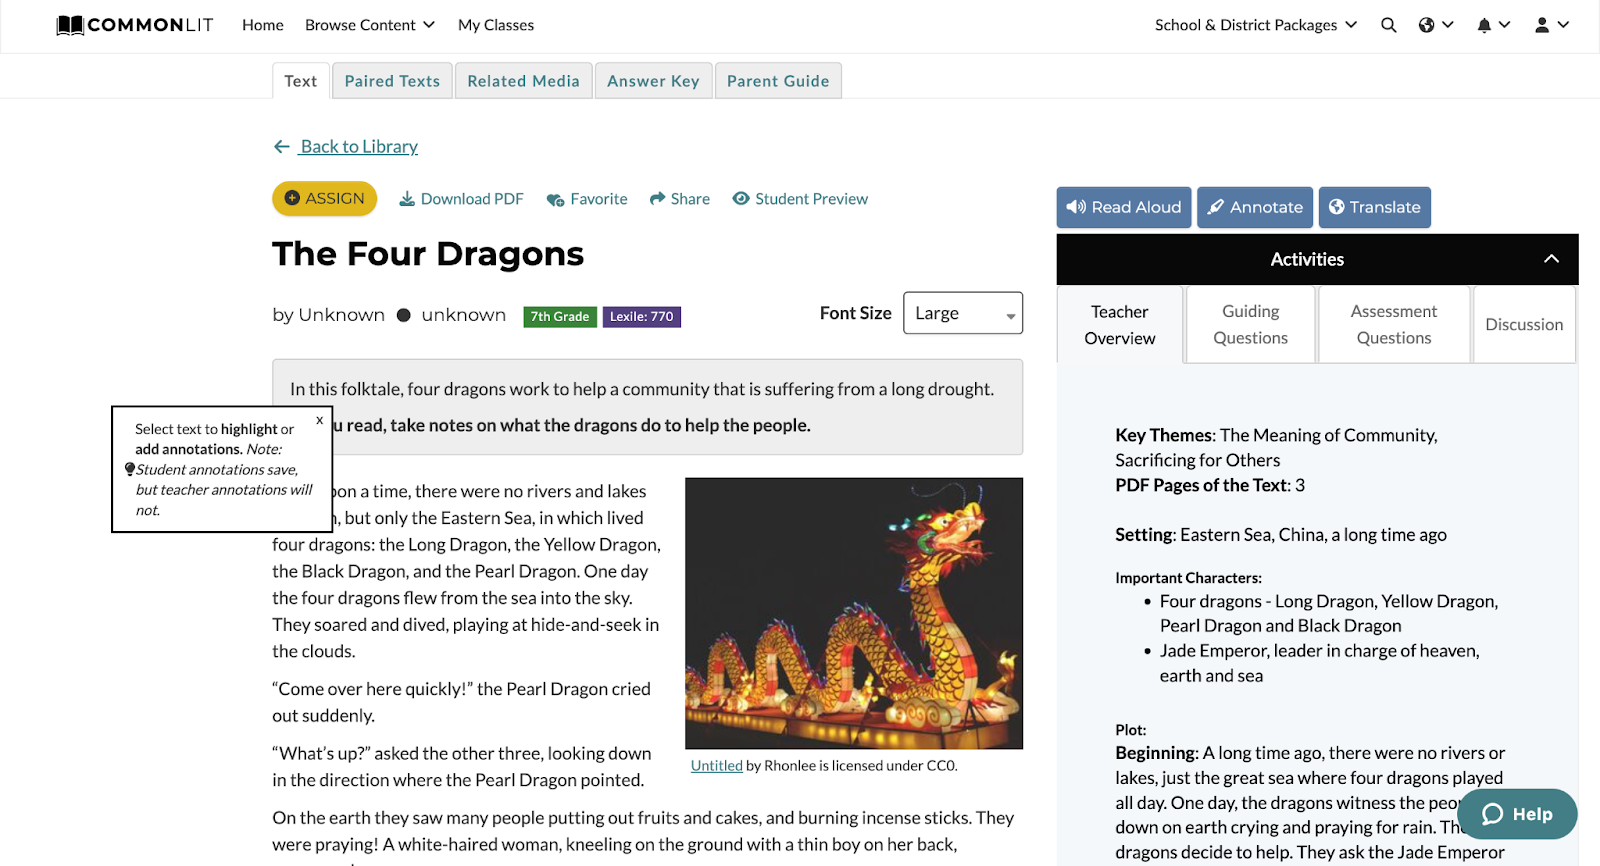 CommonLit lesson for “The Four Dragons,” a popular folktale, with directions on how to use the annotation tool.